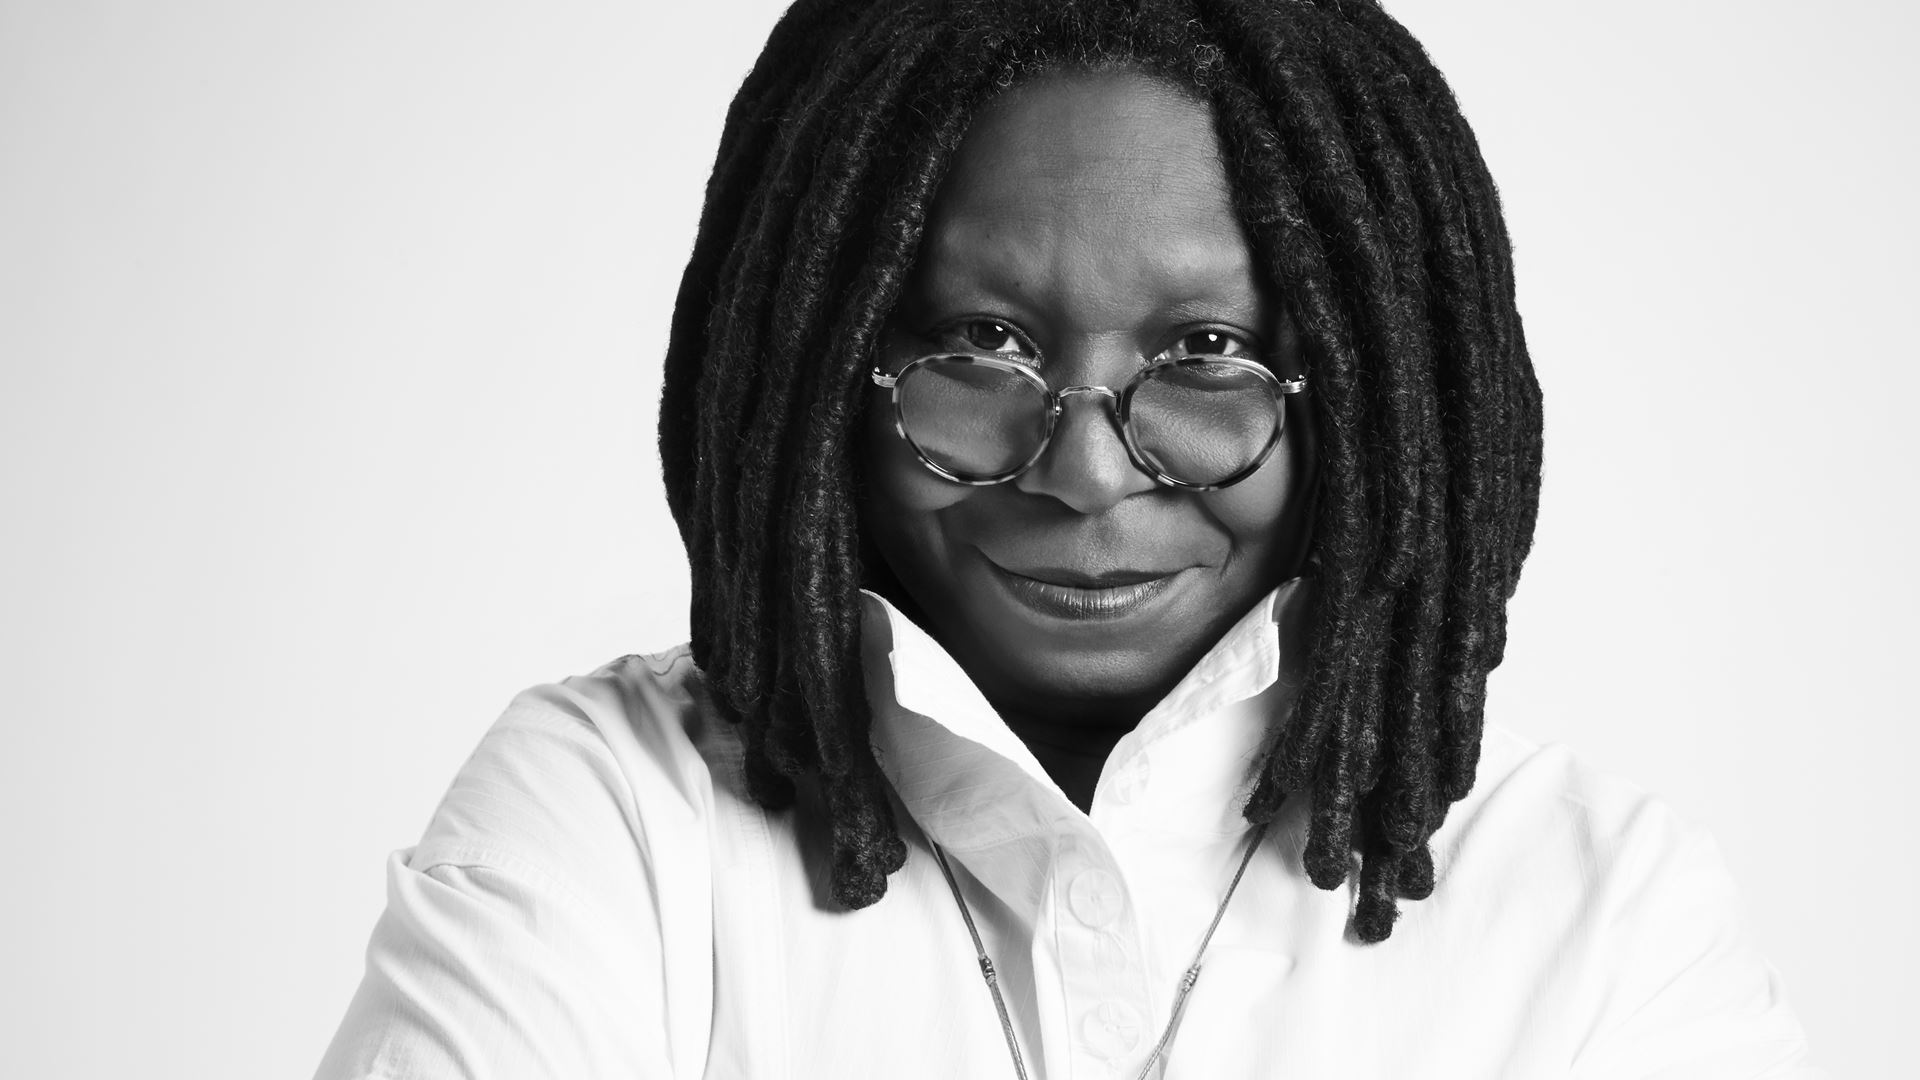 Whoopi Goldberg comes to the Library of Congress on May 10